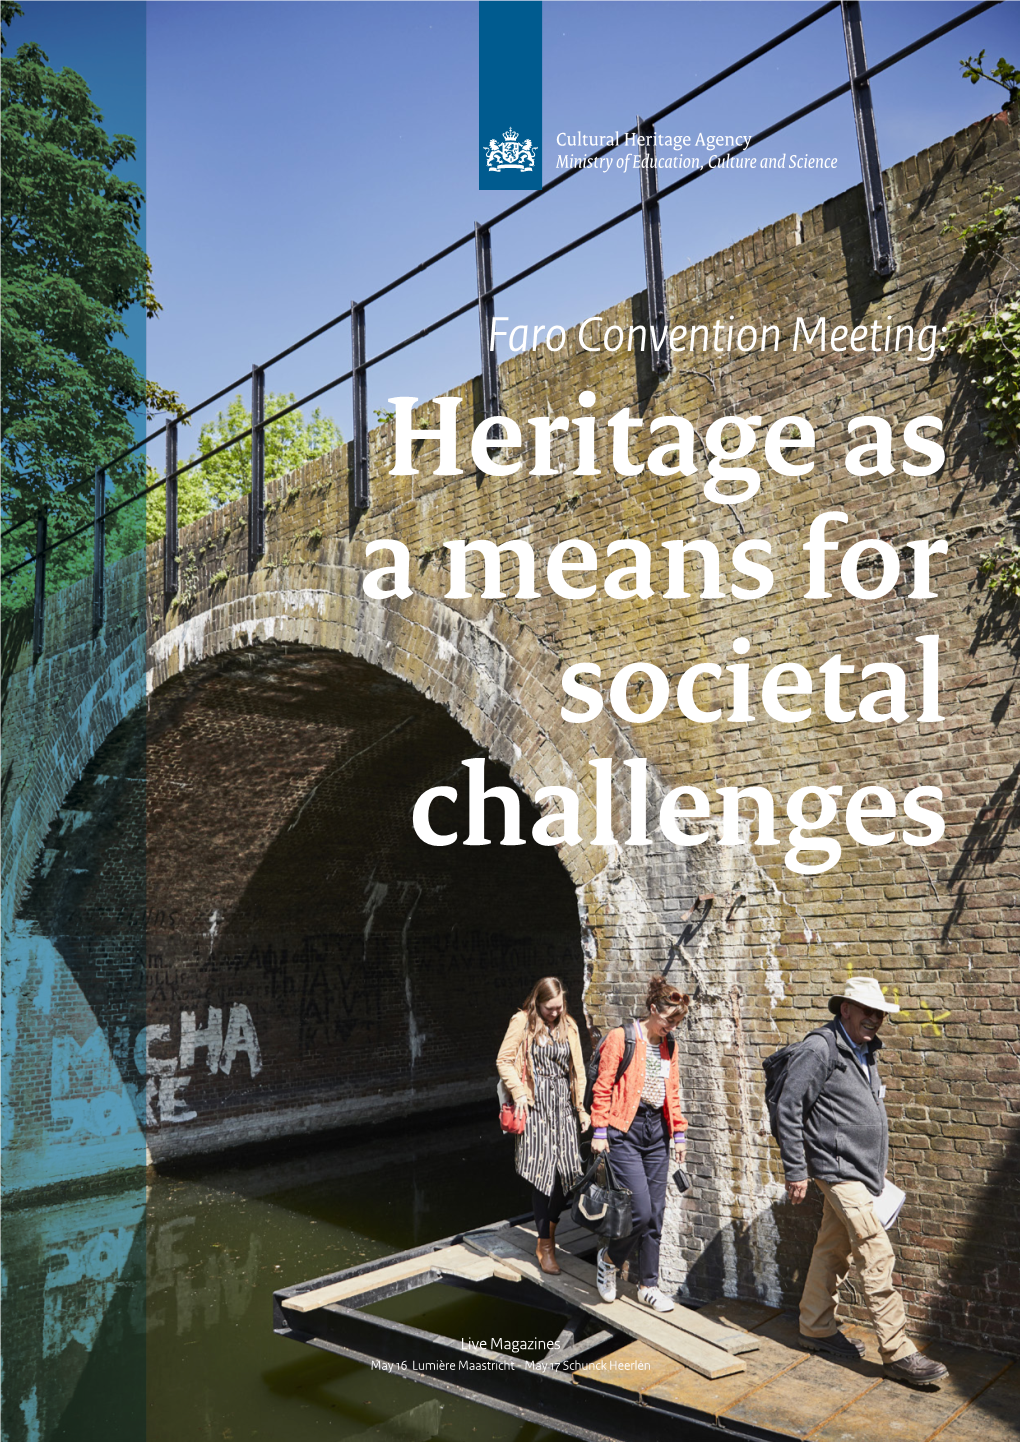 Faro Convention Meeting: Heritage As a Means for Societal Challenges